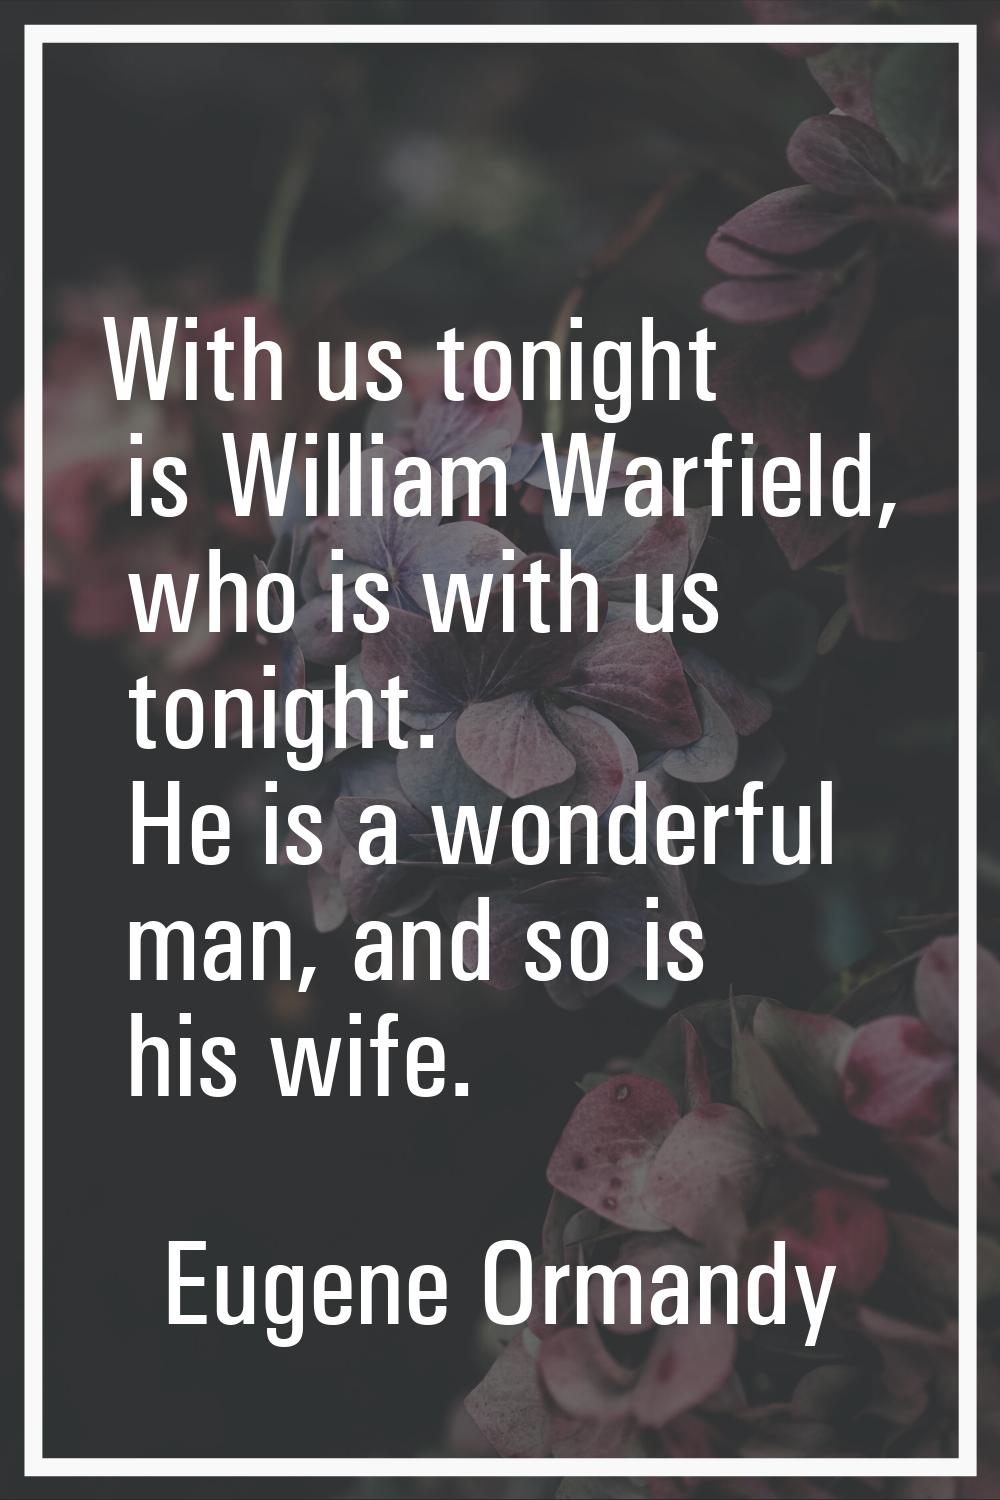 With us tonight is William Warfield, who is with us tonight. He is a wonderful man, and so is his w